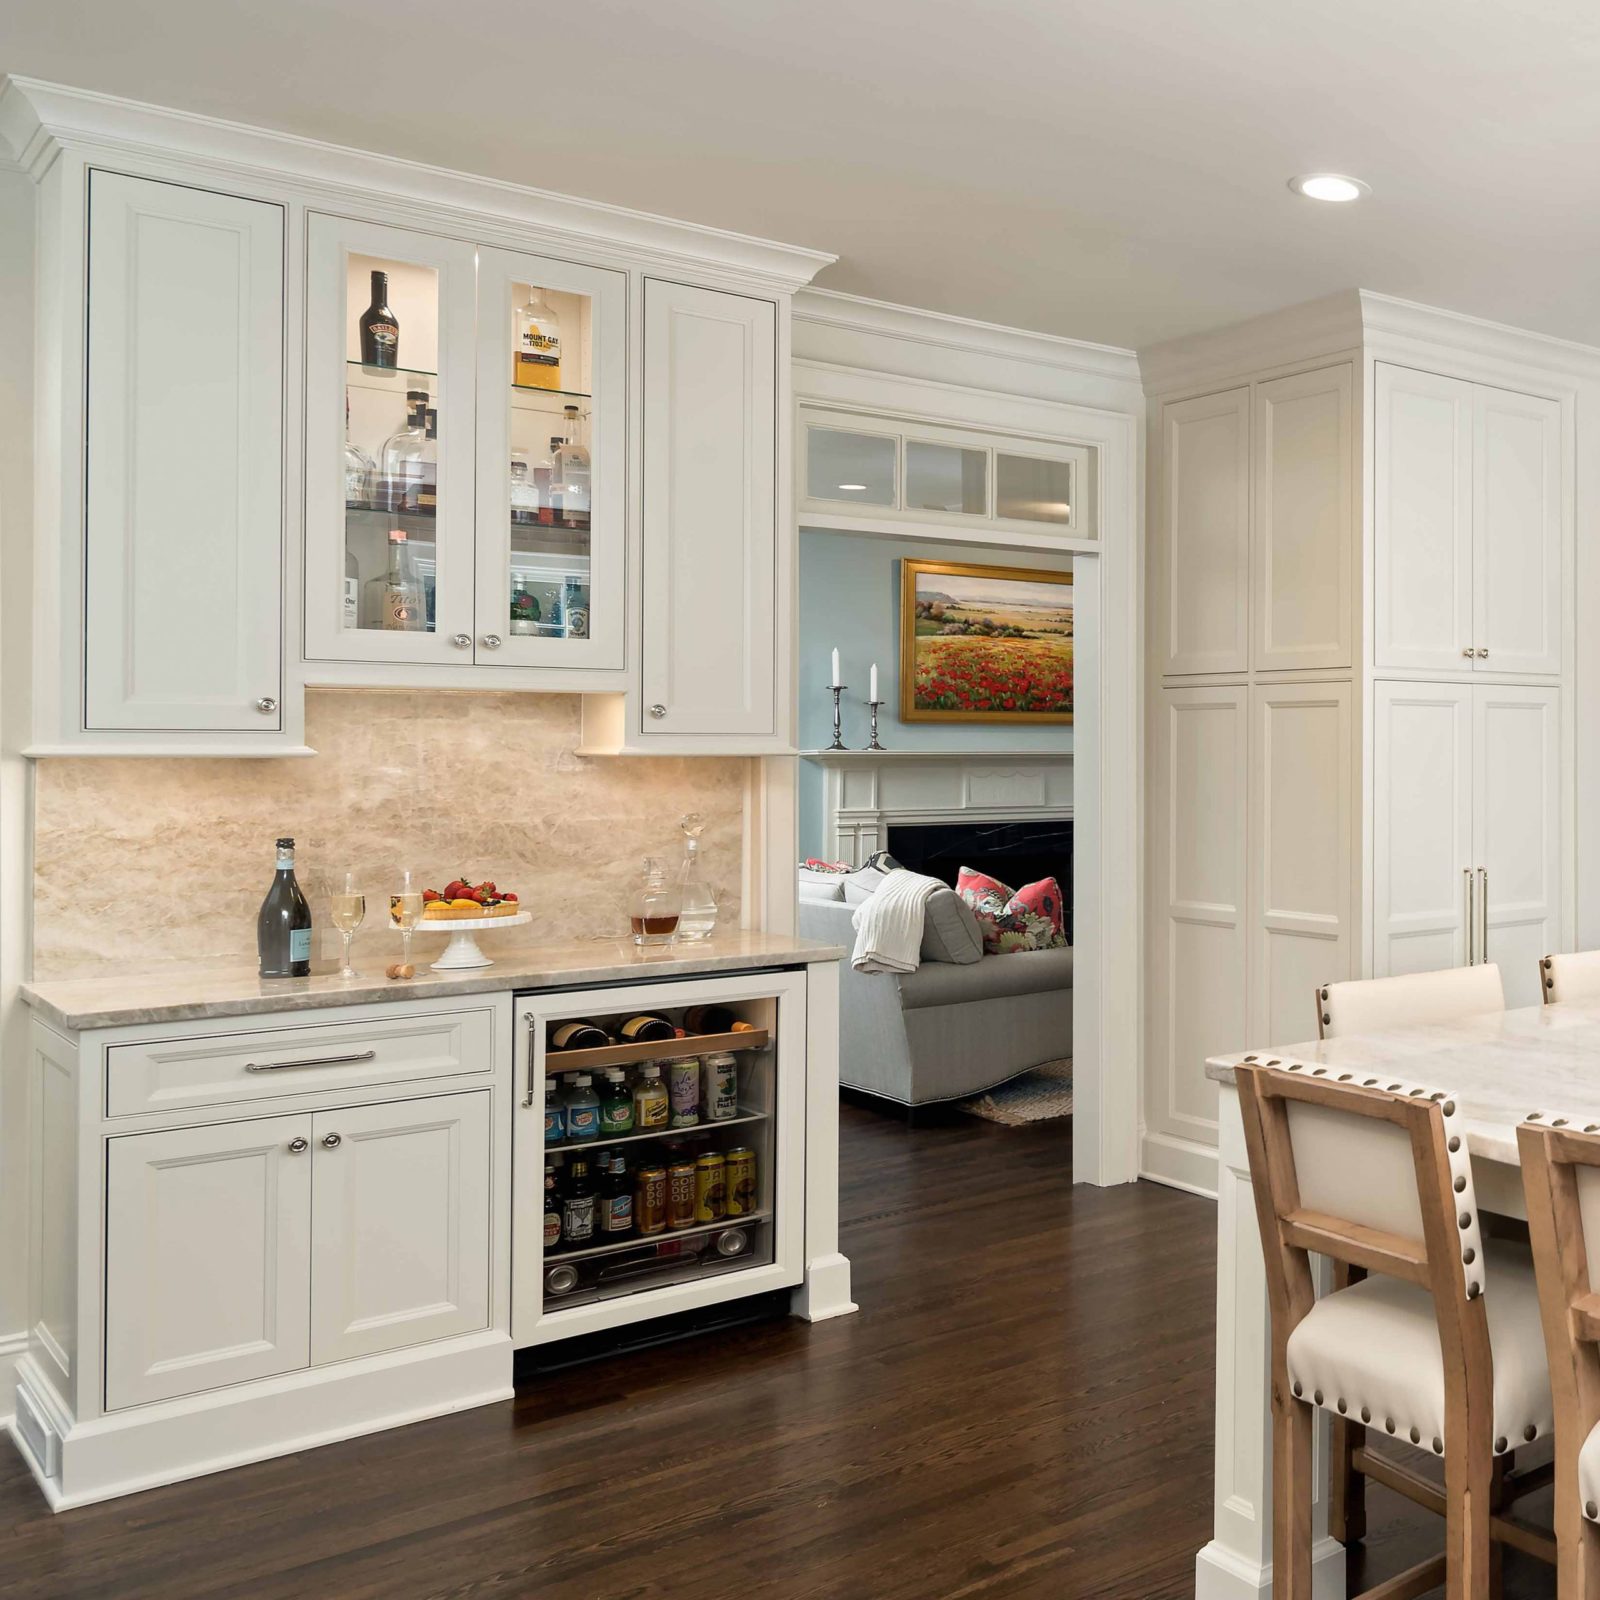 Dry Bar Ideas And Why These Bars, Kitchen Bar Cabinet Ideas